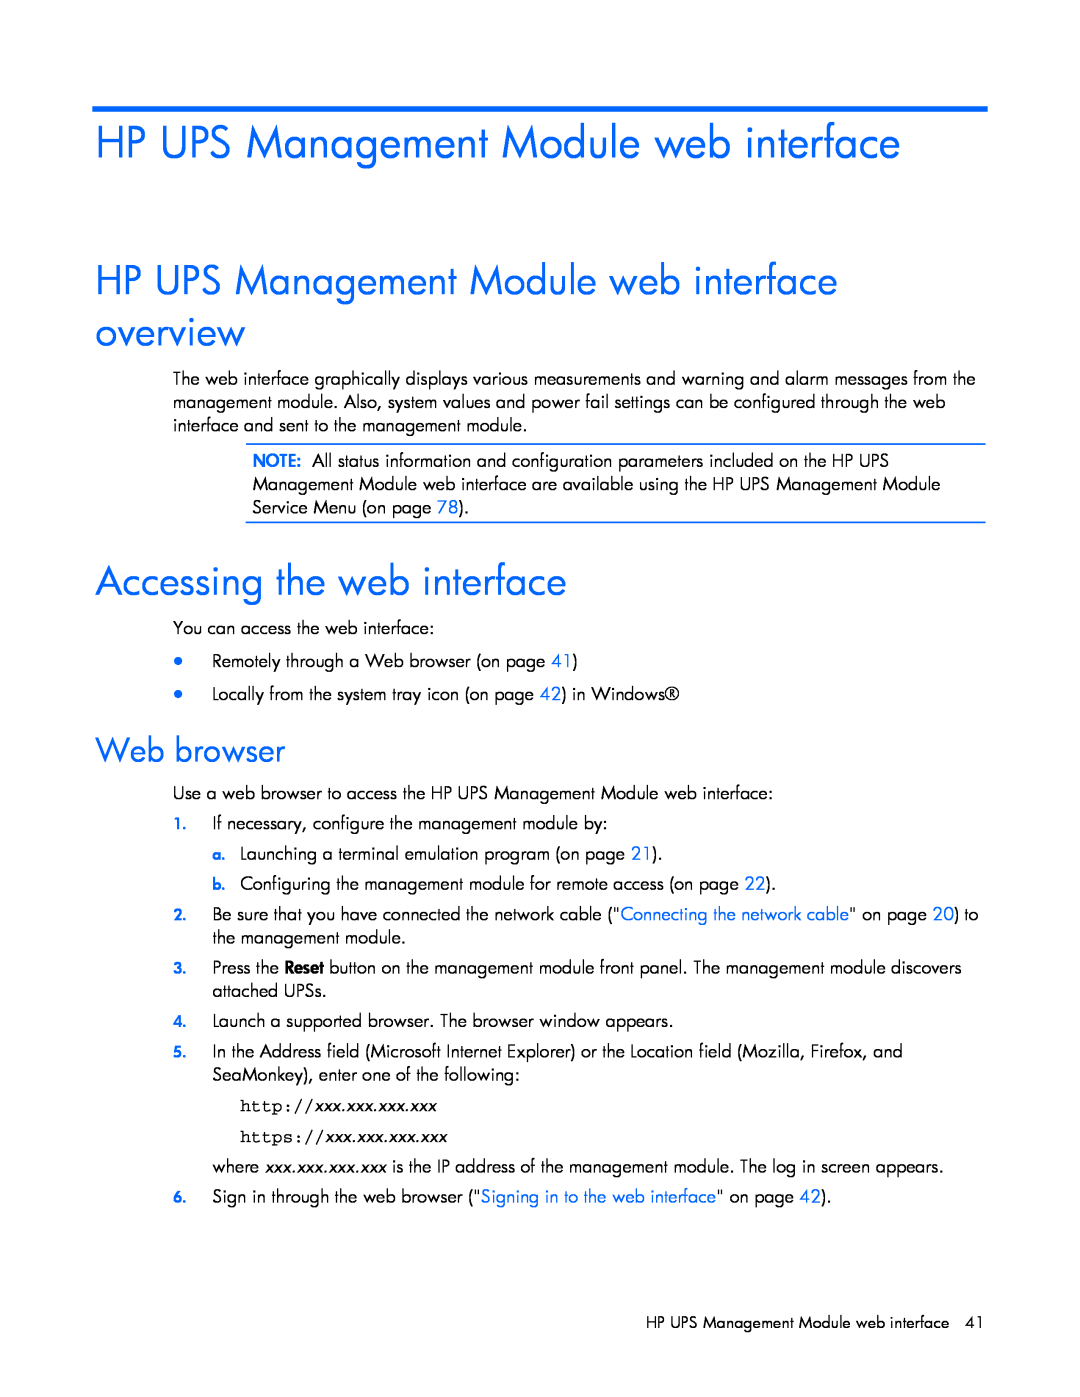 HP J4367A, A6584A, A1354A HP UPS Management Module web interface overview, Accessing the web interface, Web browser 